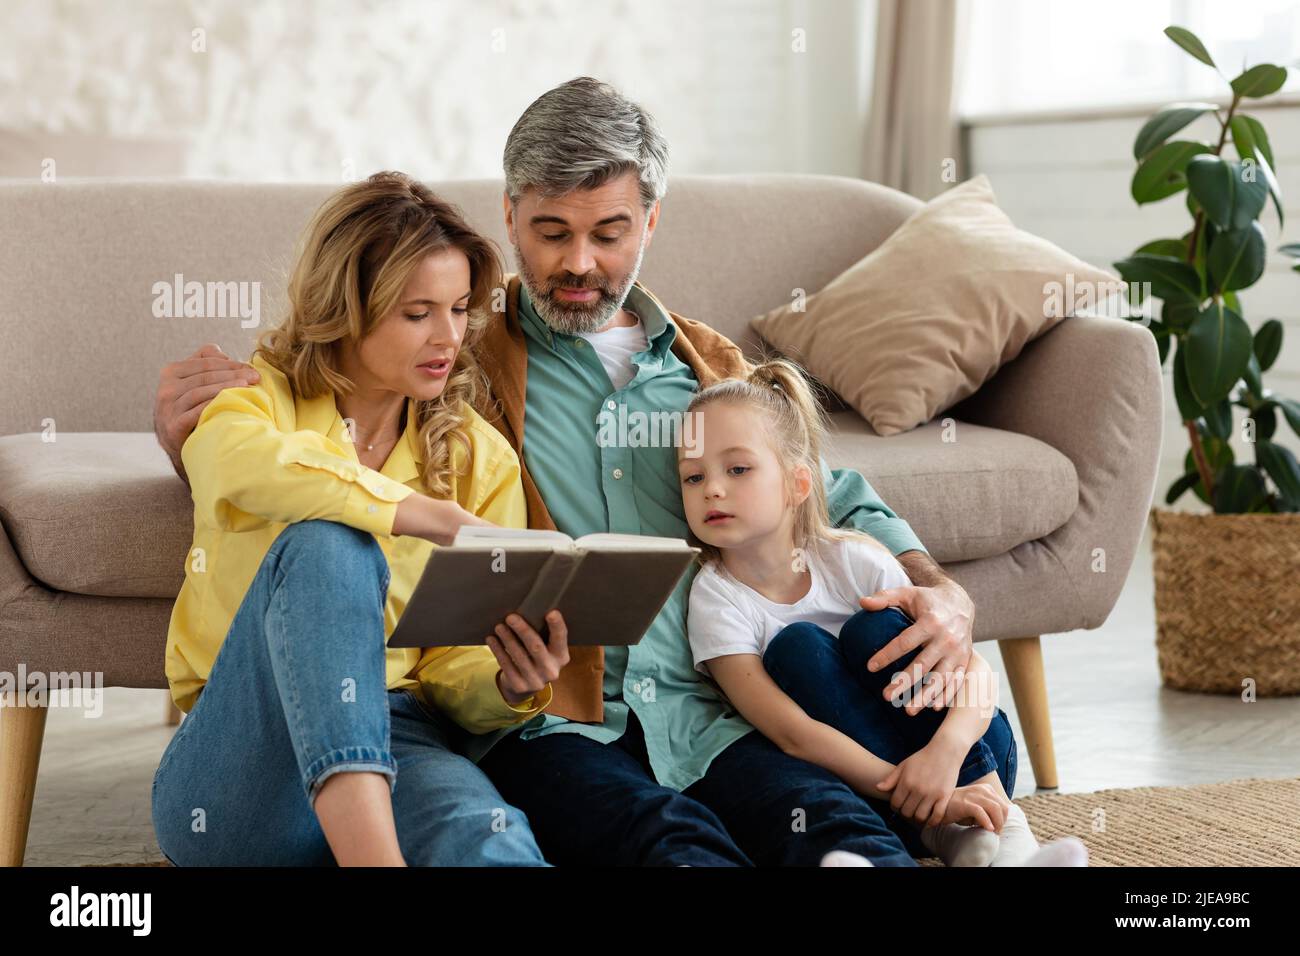 Family Reading Book Hugging Bonding Sitting Near Couch At Home Stock Photo